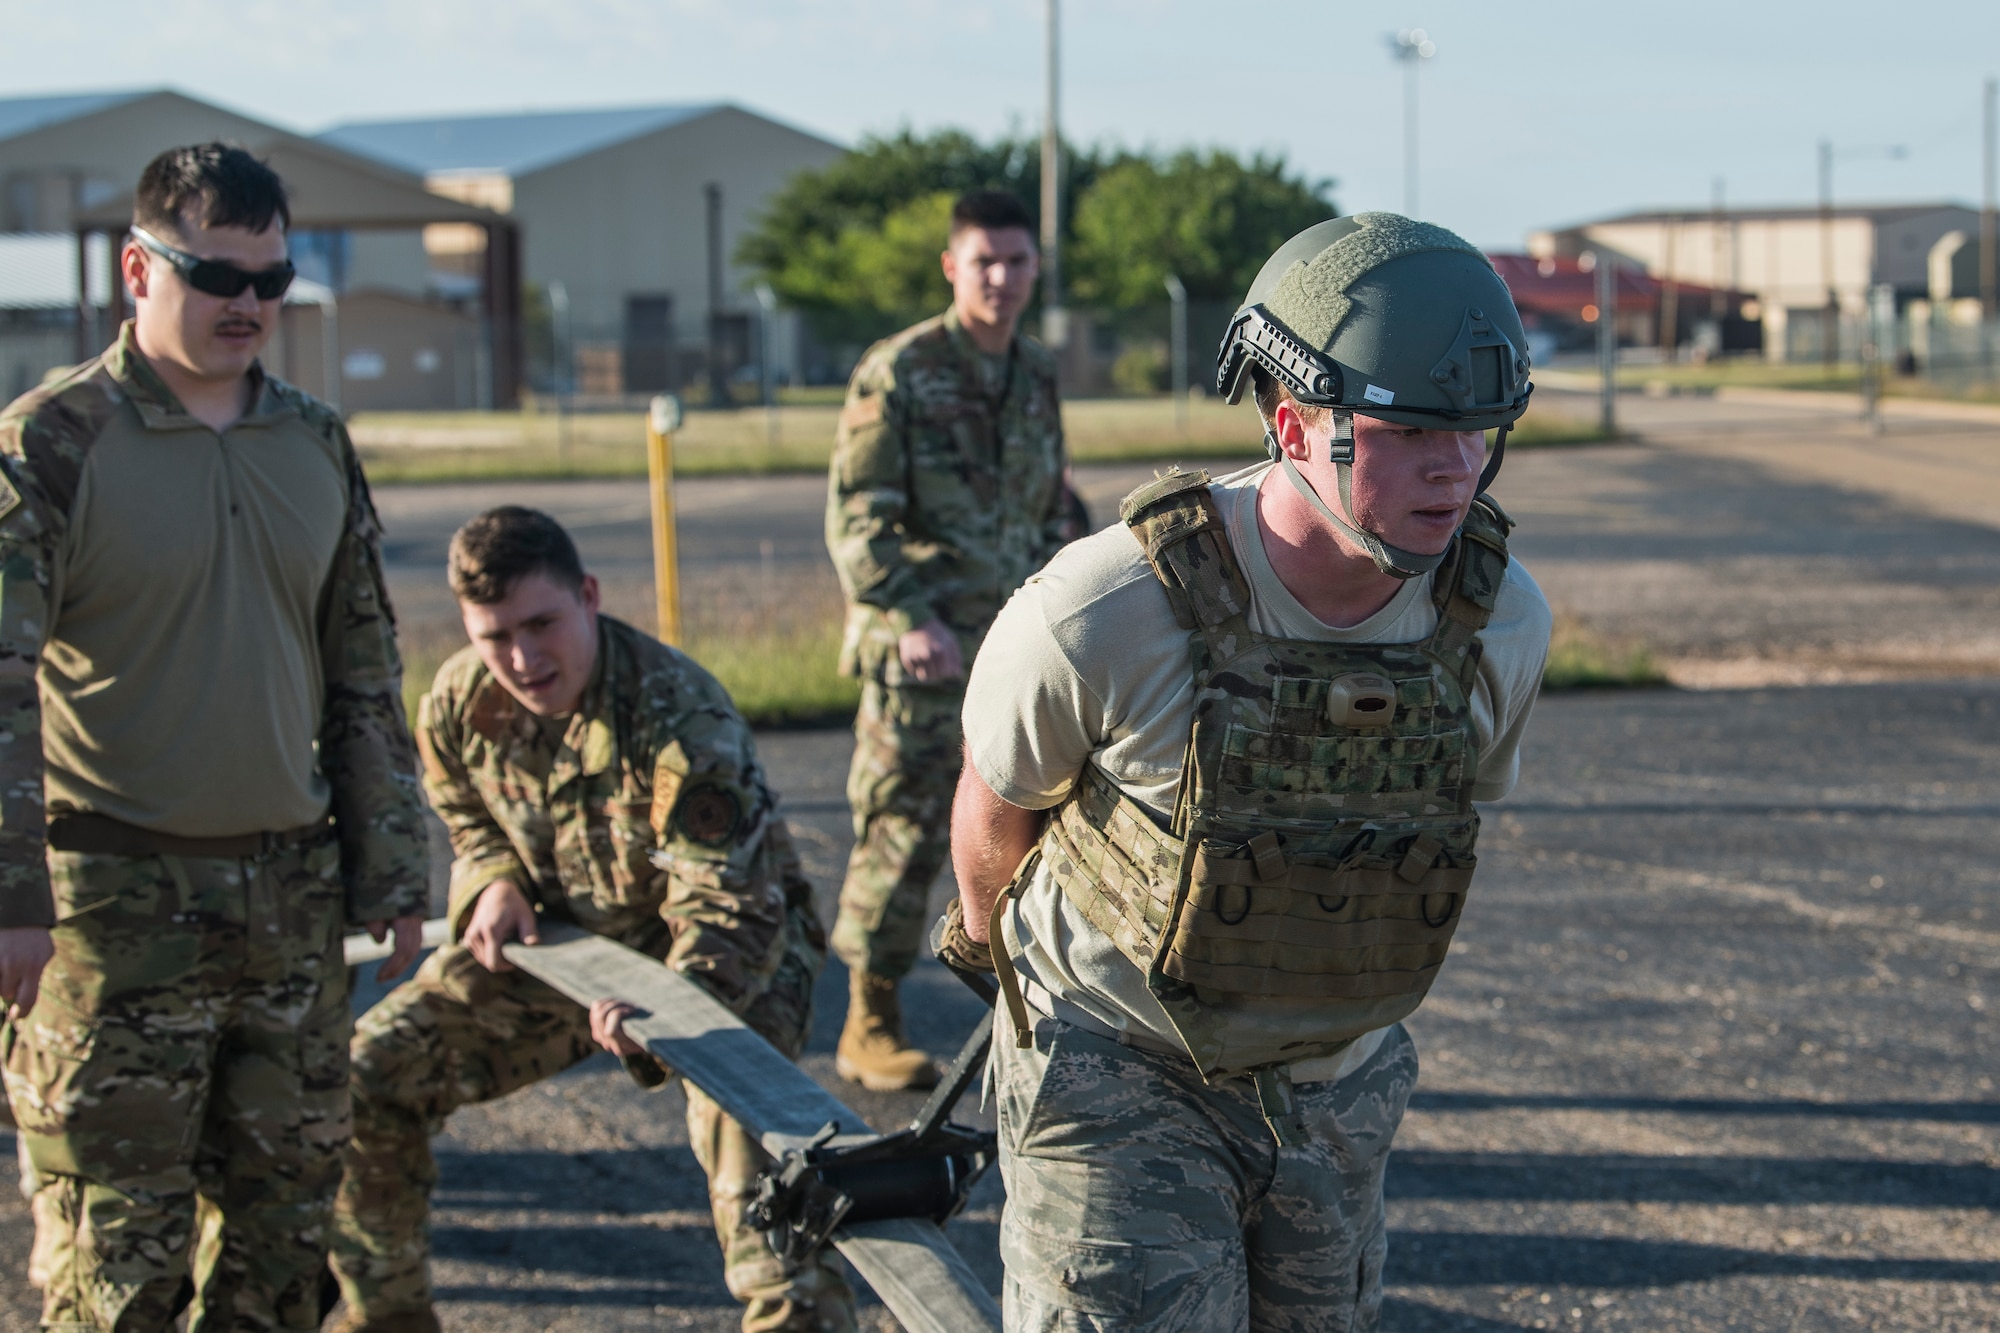 Airman 1st Class Kyle Fabrizius, 27th Special Operations Logistics Readiness Squadron fuels distribution technician, drags a roller across a fuel tube to empty it during the Forward Air Refueling Point tryouts at Cannon Air Force Base, N.M., October 9, 2019. During the tryouts, members do a physical test first and then are interviewed by the current FARP team. (U.S. Air Force photo by Senior Airman Vernon R. Walter III)